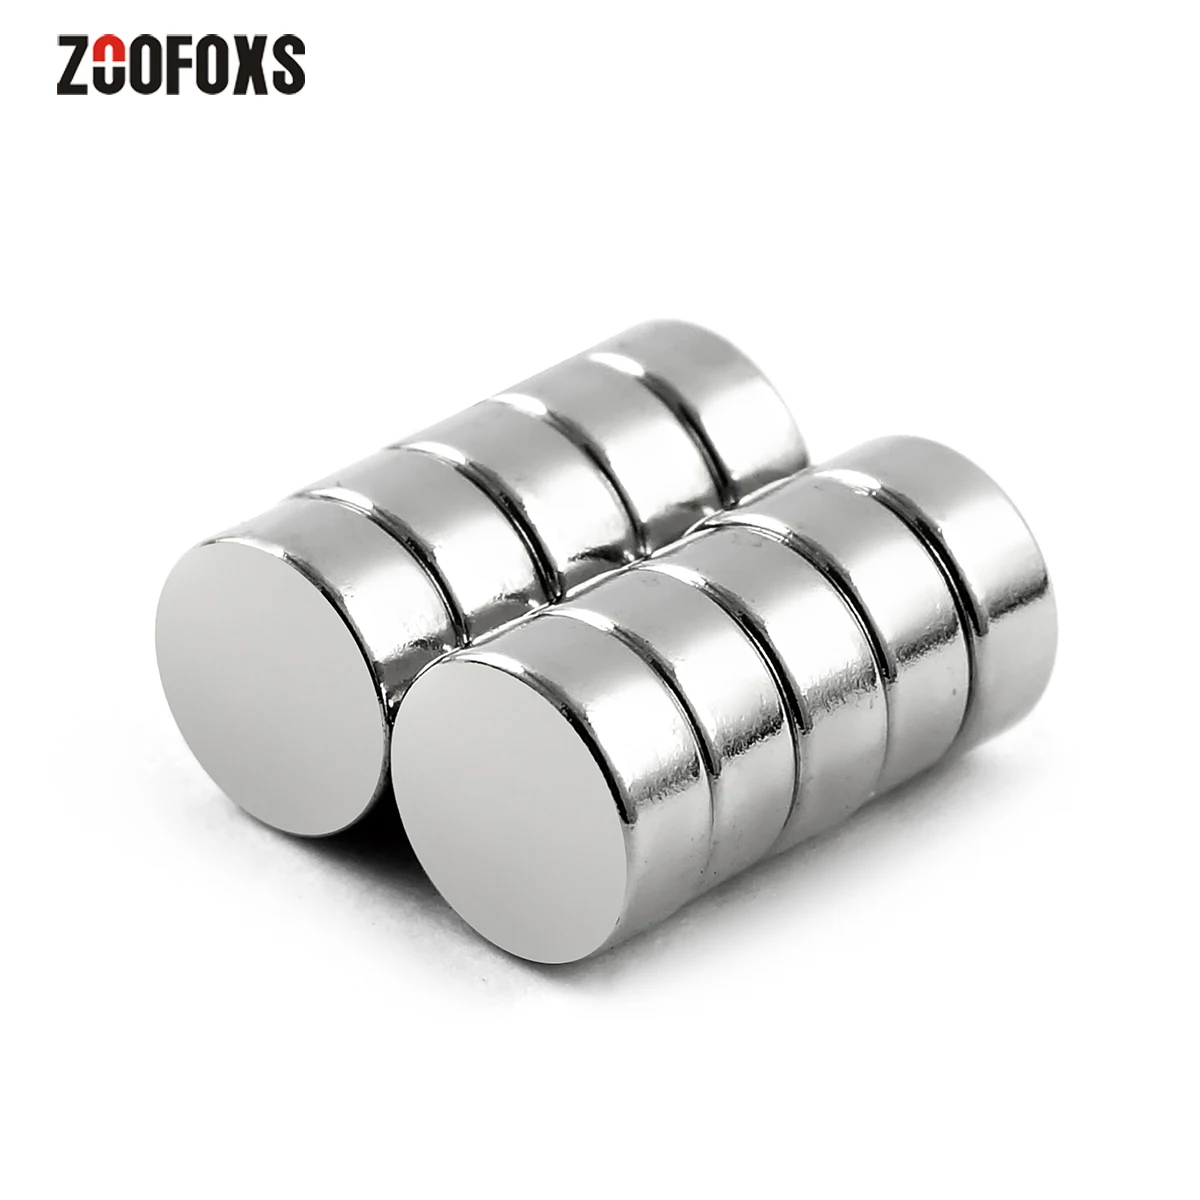 

ZOOFOXS 10/20pcs 7 x 3mm N35 Round Small Neodymium Magnet Rare Earth Powerful Permanet Magnets 7*3mm for Craft DIY